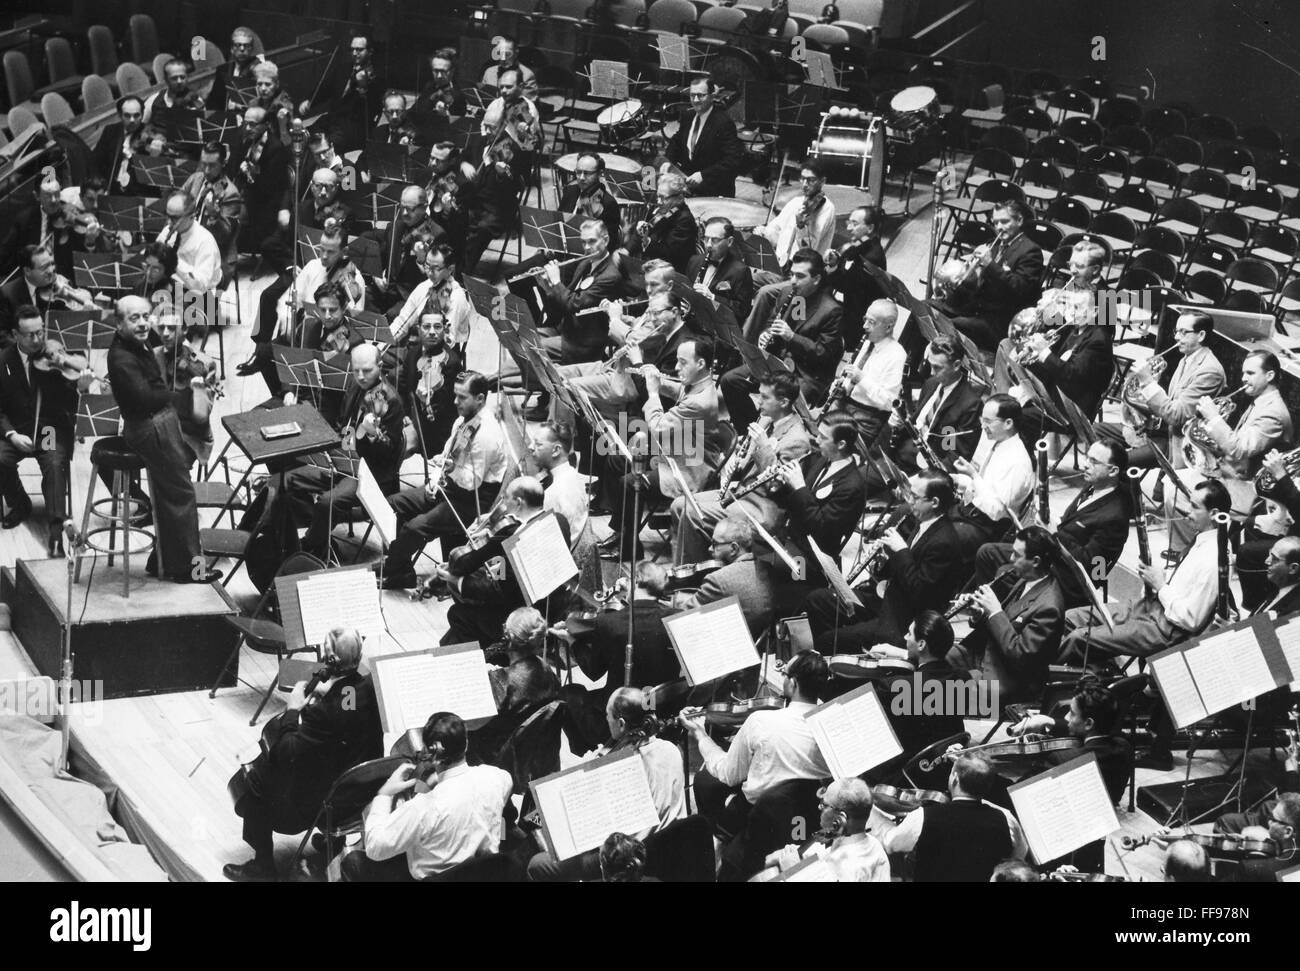 EUGENE ORMANDY (1899-1985). /nAmerican (Hungarian-born) conductor. Ormandy conducting the Philadelphia Orchestra in rehearsal at the United Nations, New York City, 1960. Stock Photo